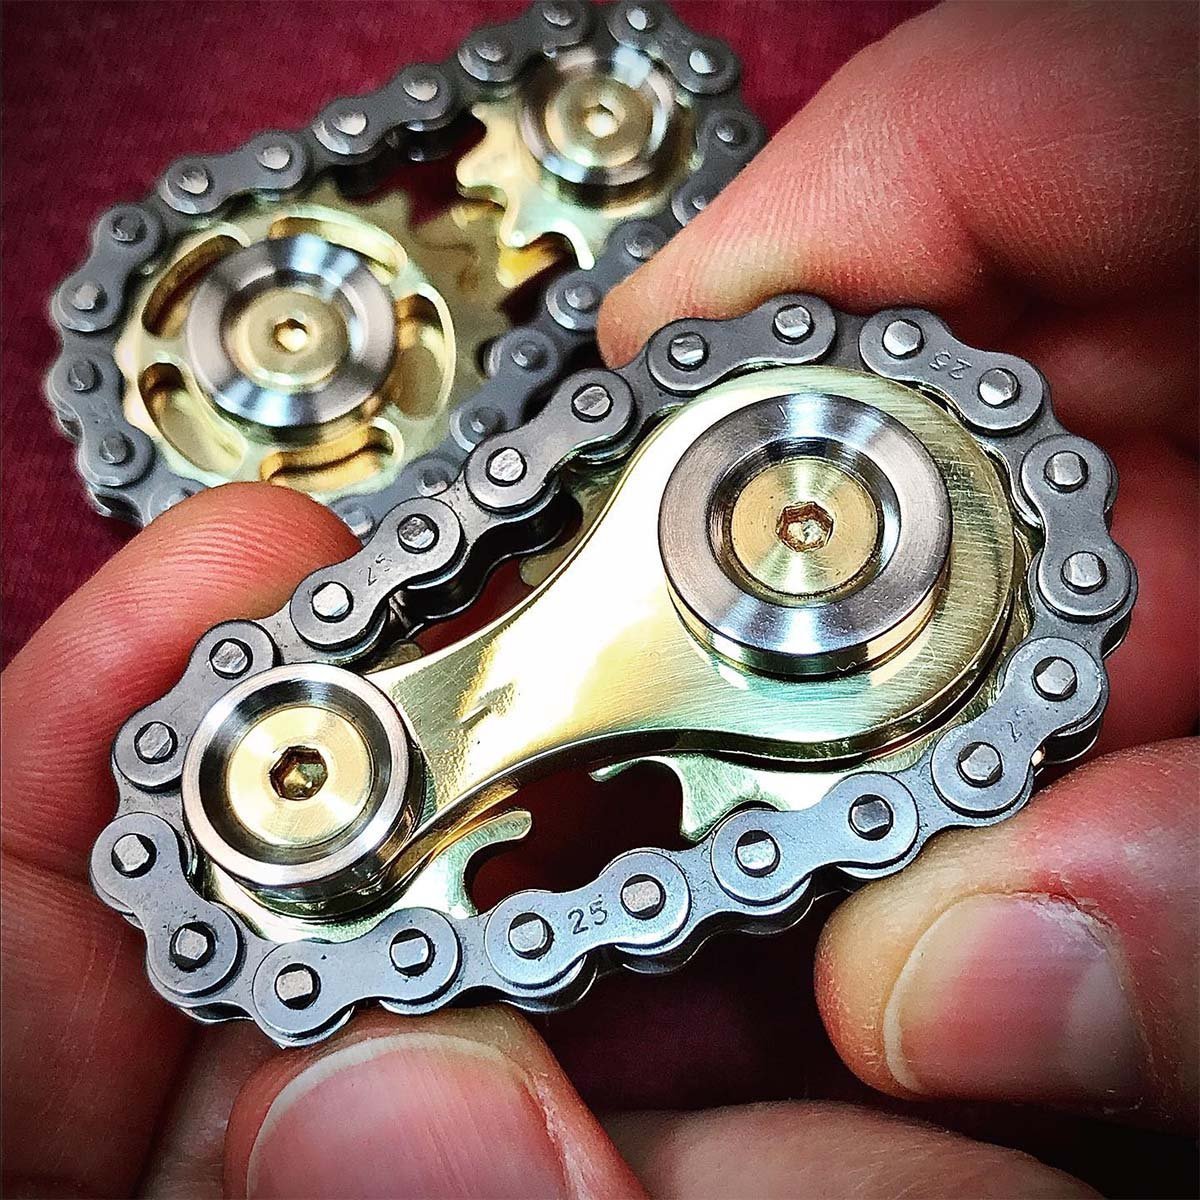 Sprockets Bicycle Chain Fidget Spinner Toys-Buy 2 Free Shipping